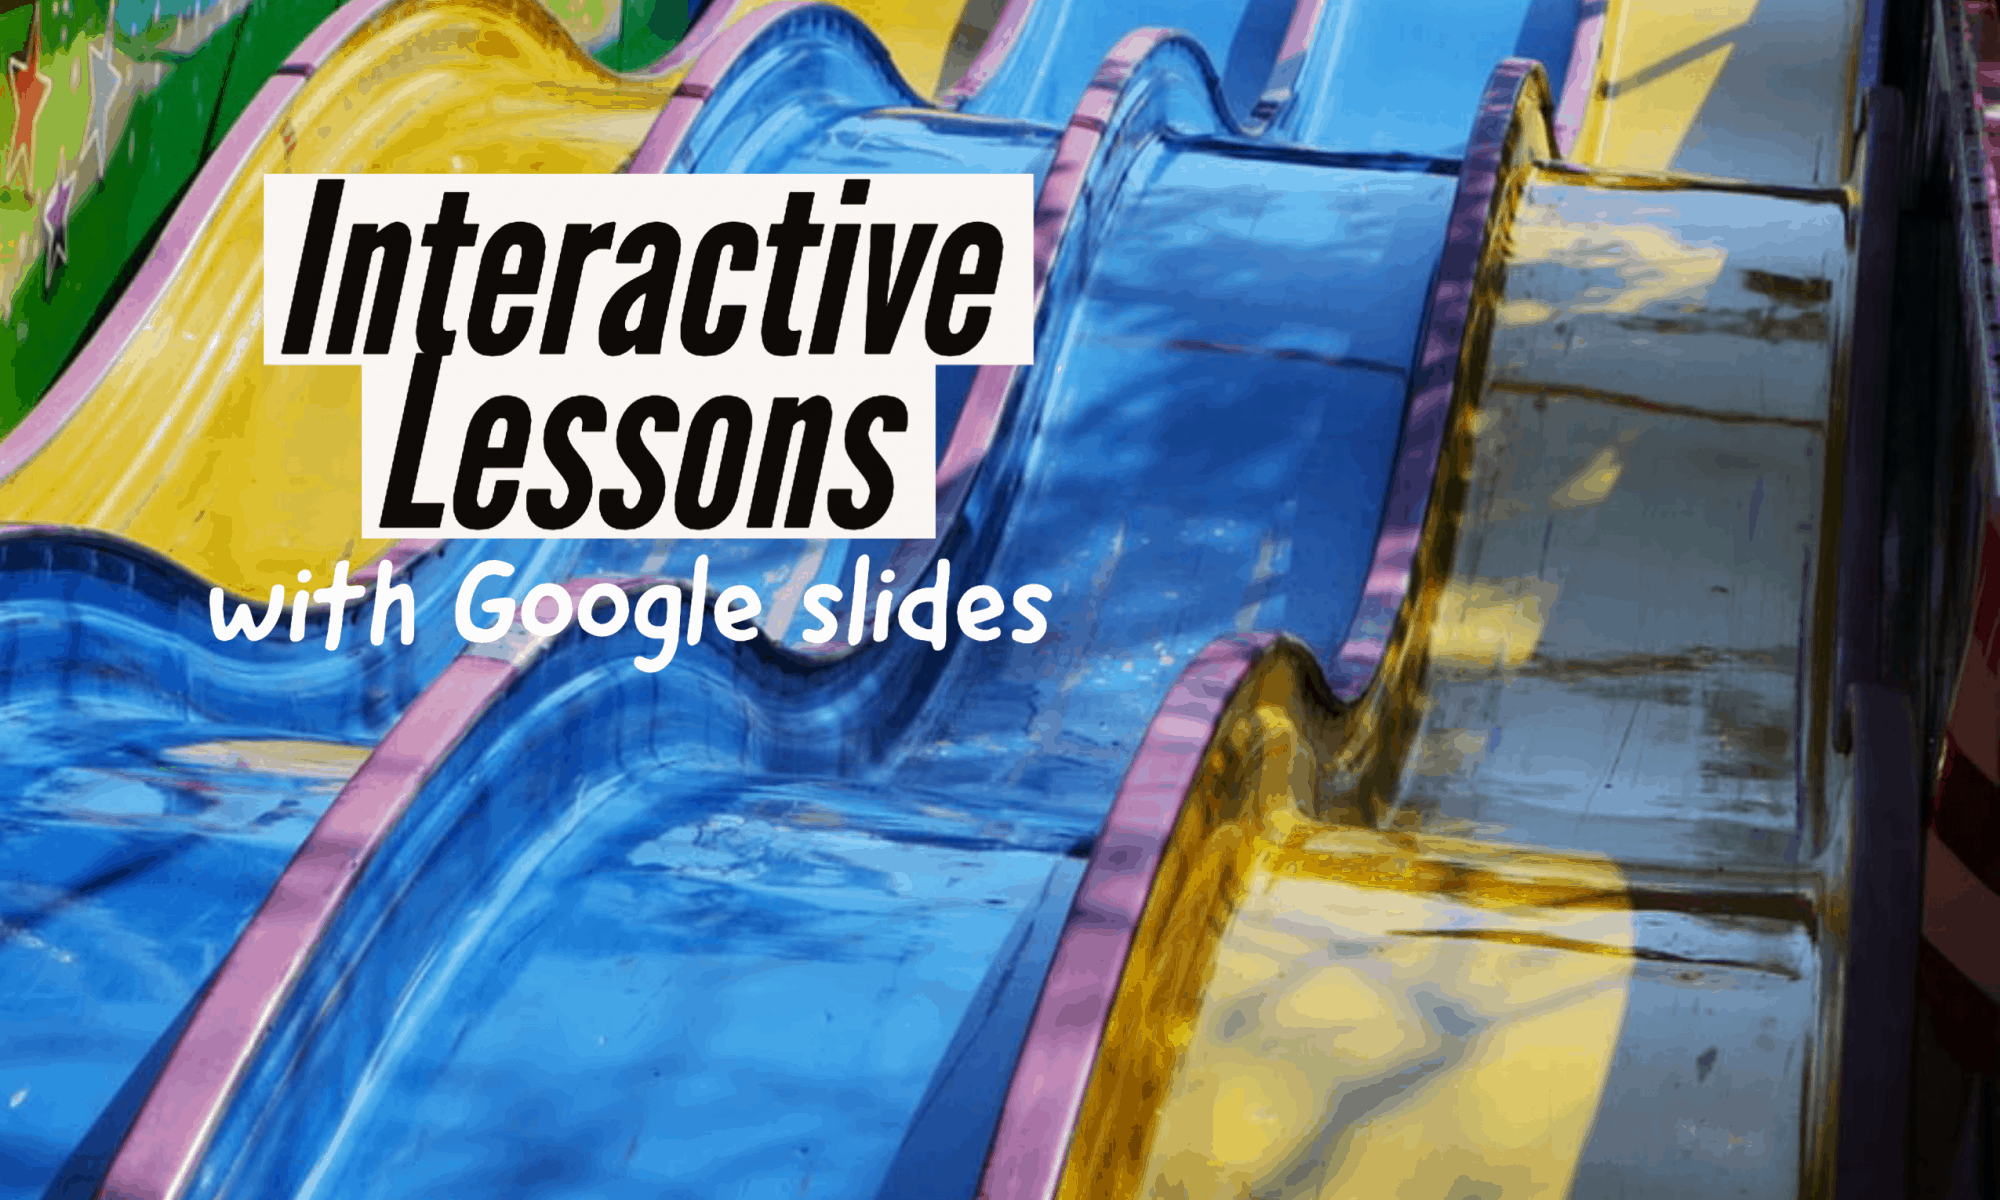 Lesson 2: Interactive Lessons with Google slides